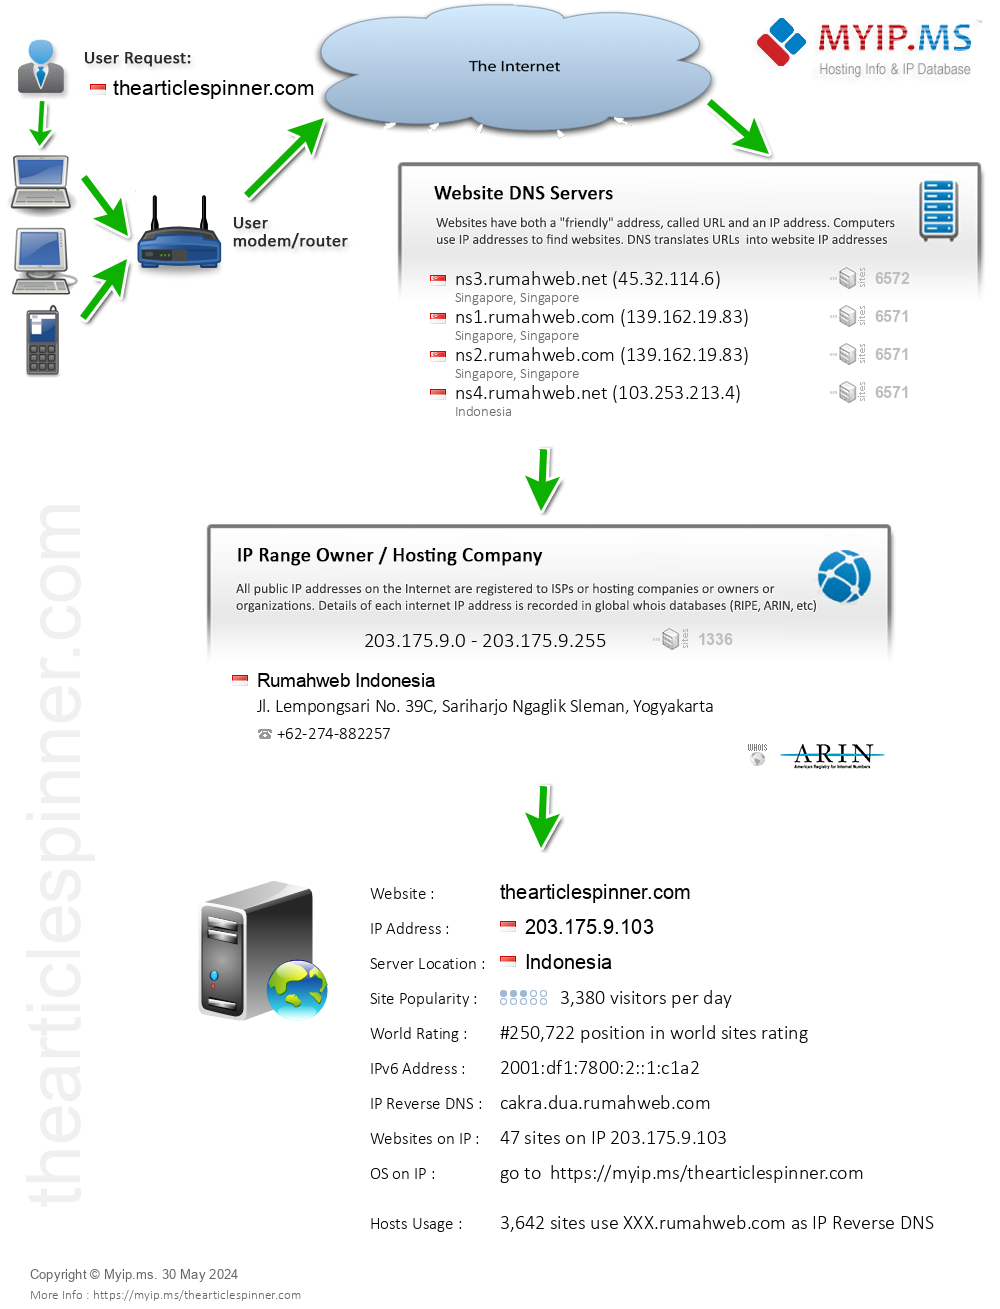 Thearticlespinner.com - Website Hosting Visual IP Diagram